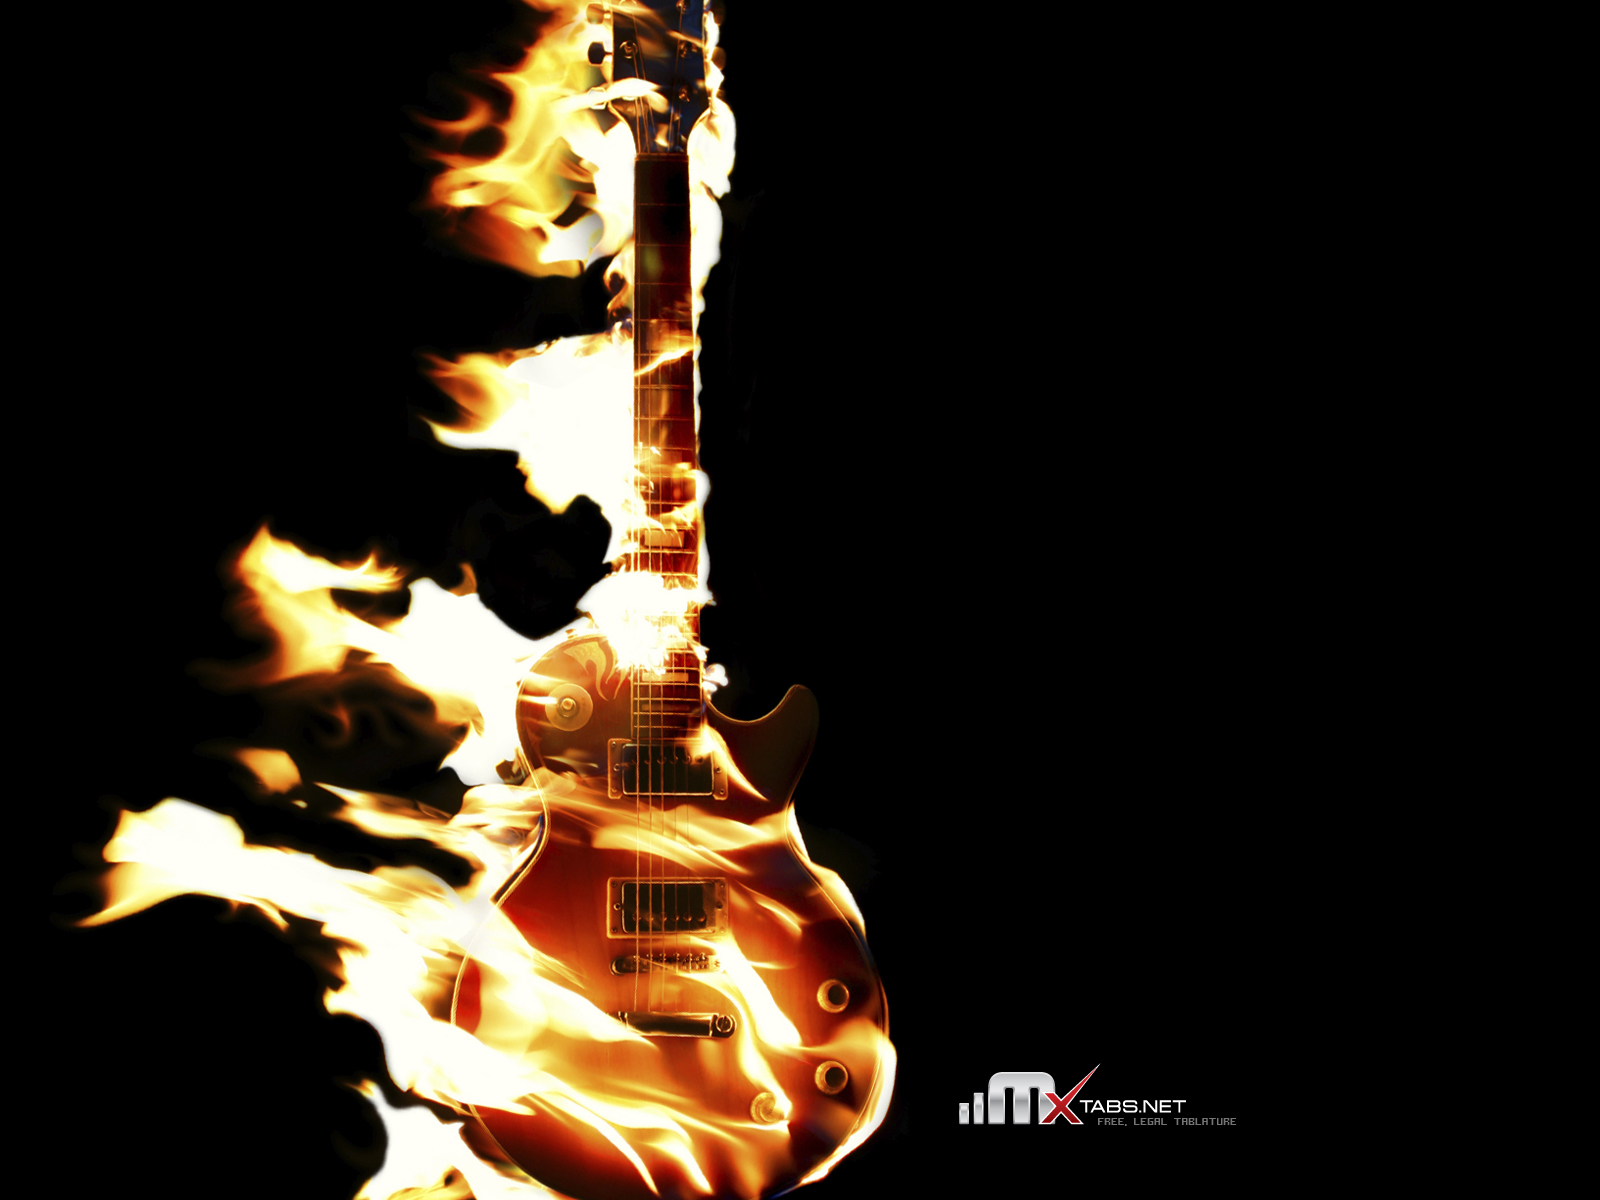 Guitar on Fire wallpaper from Guitar Wallpapers wallpapers